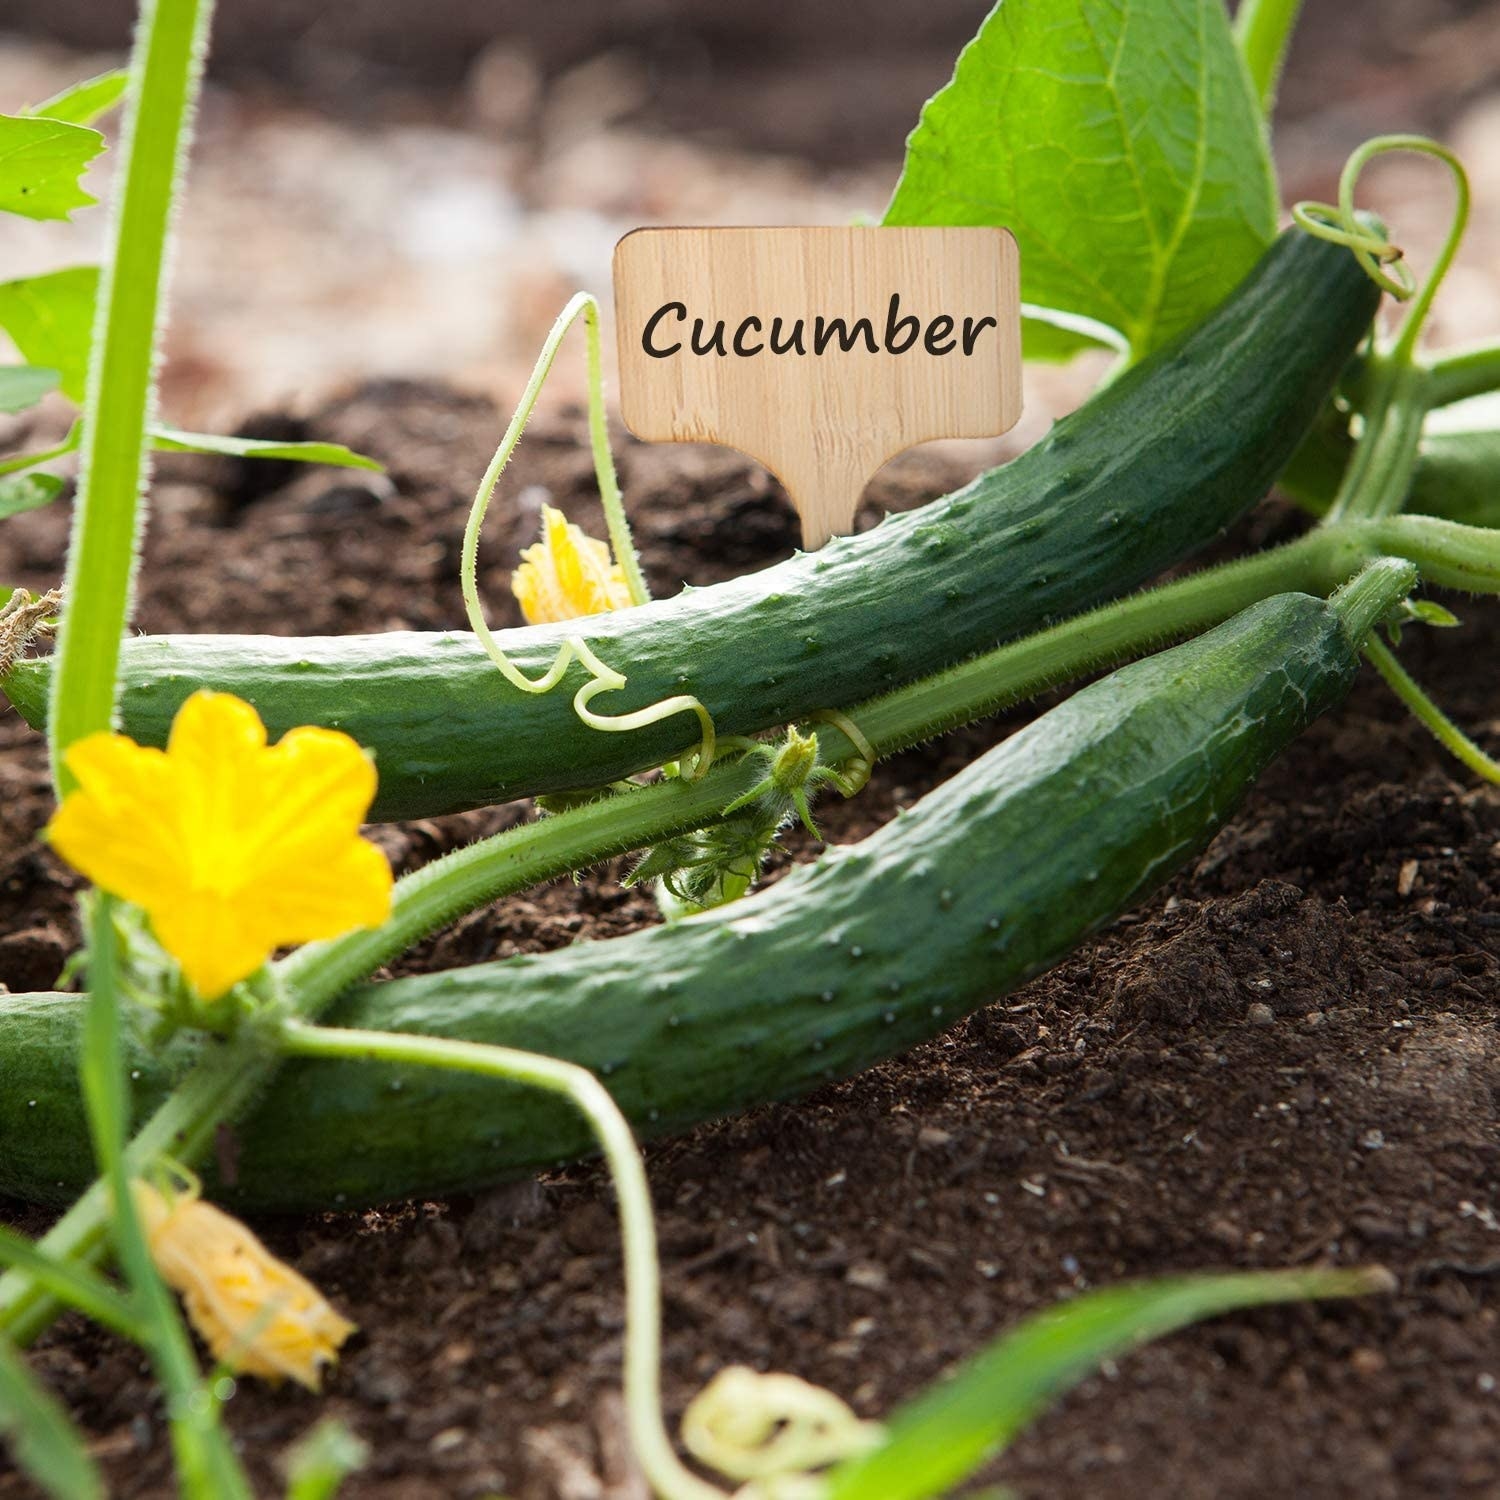 One of the labels showing where the cucumbers are in the garden